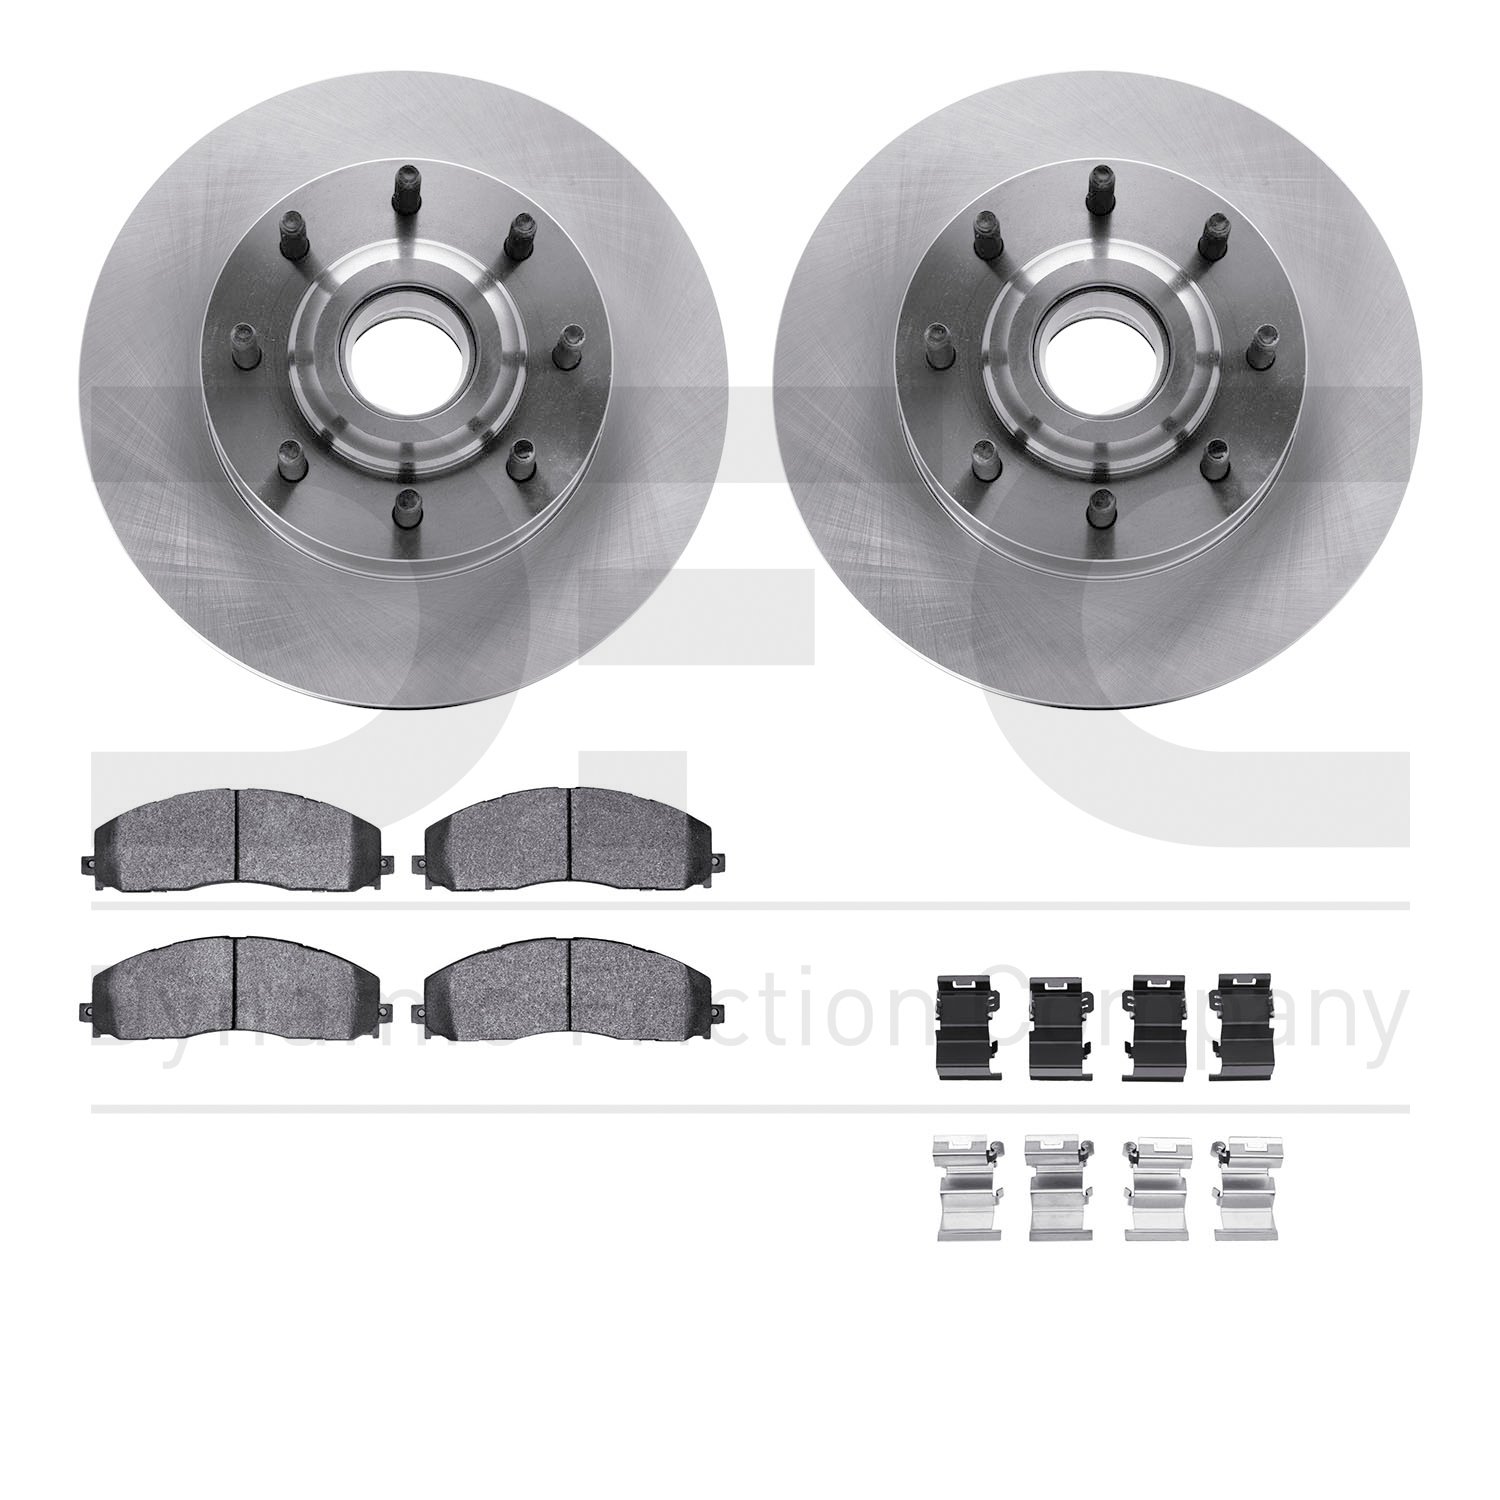 6412-54293 Brake Rotors with Ultimate-Duty Brake Pads Kit & Hardware, Fits Select Ford/Lincoln/Mercury/Mazda, Position: Front